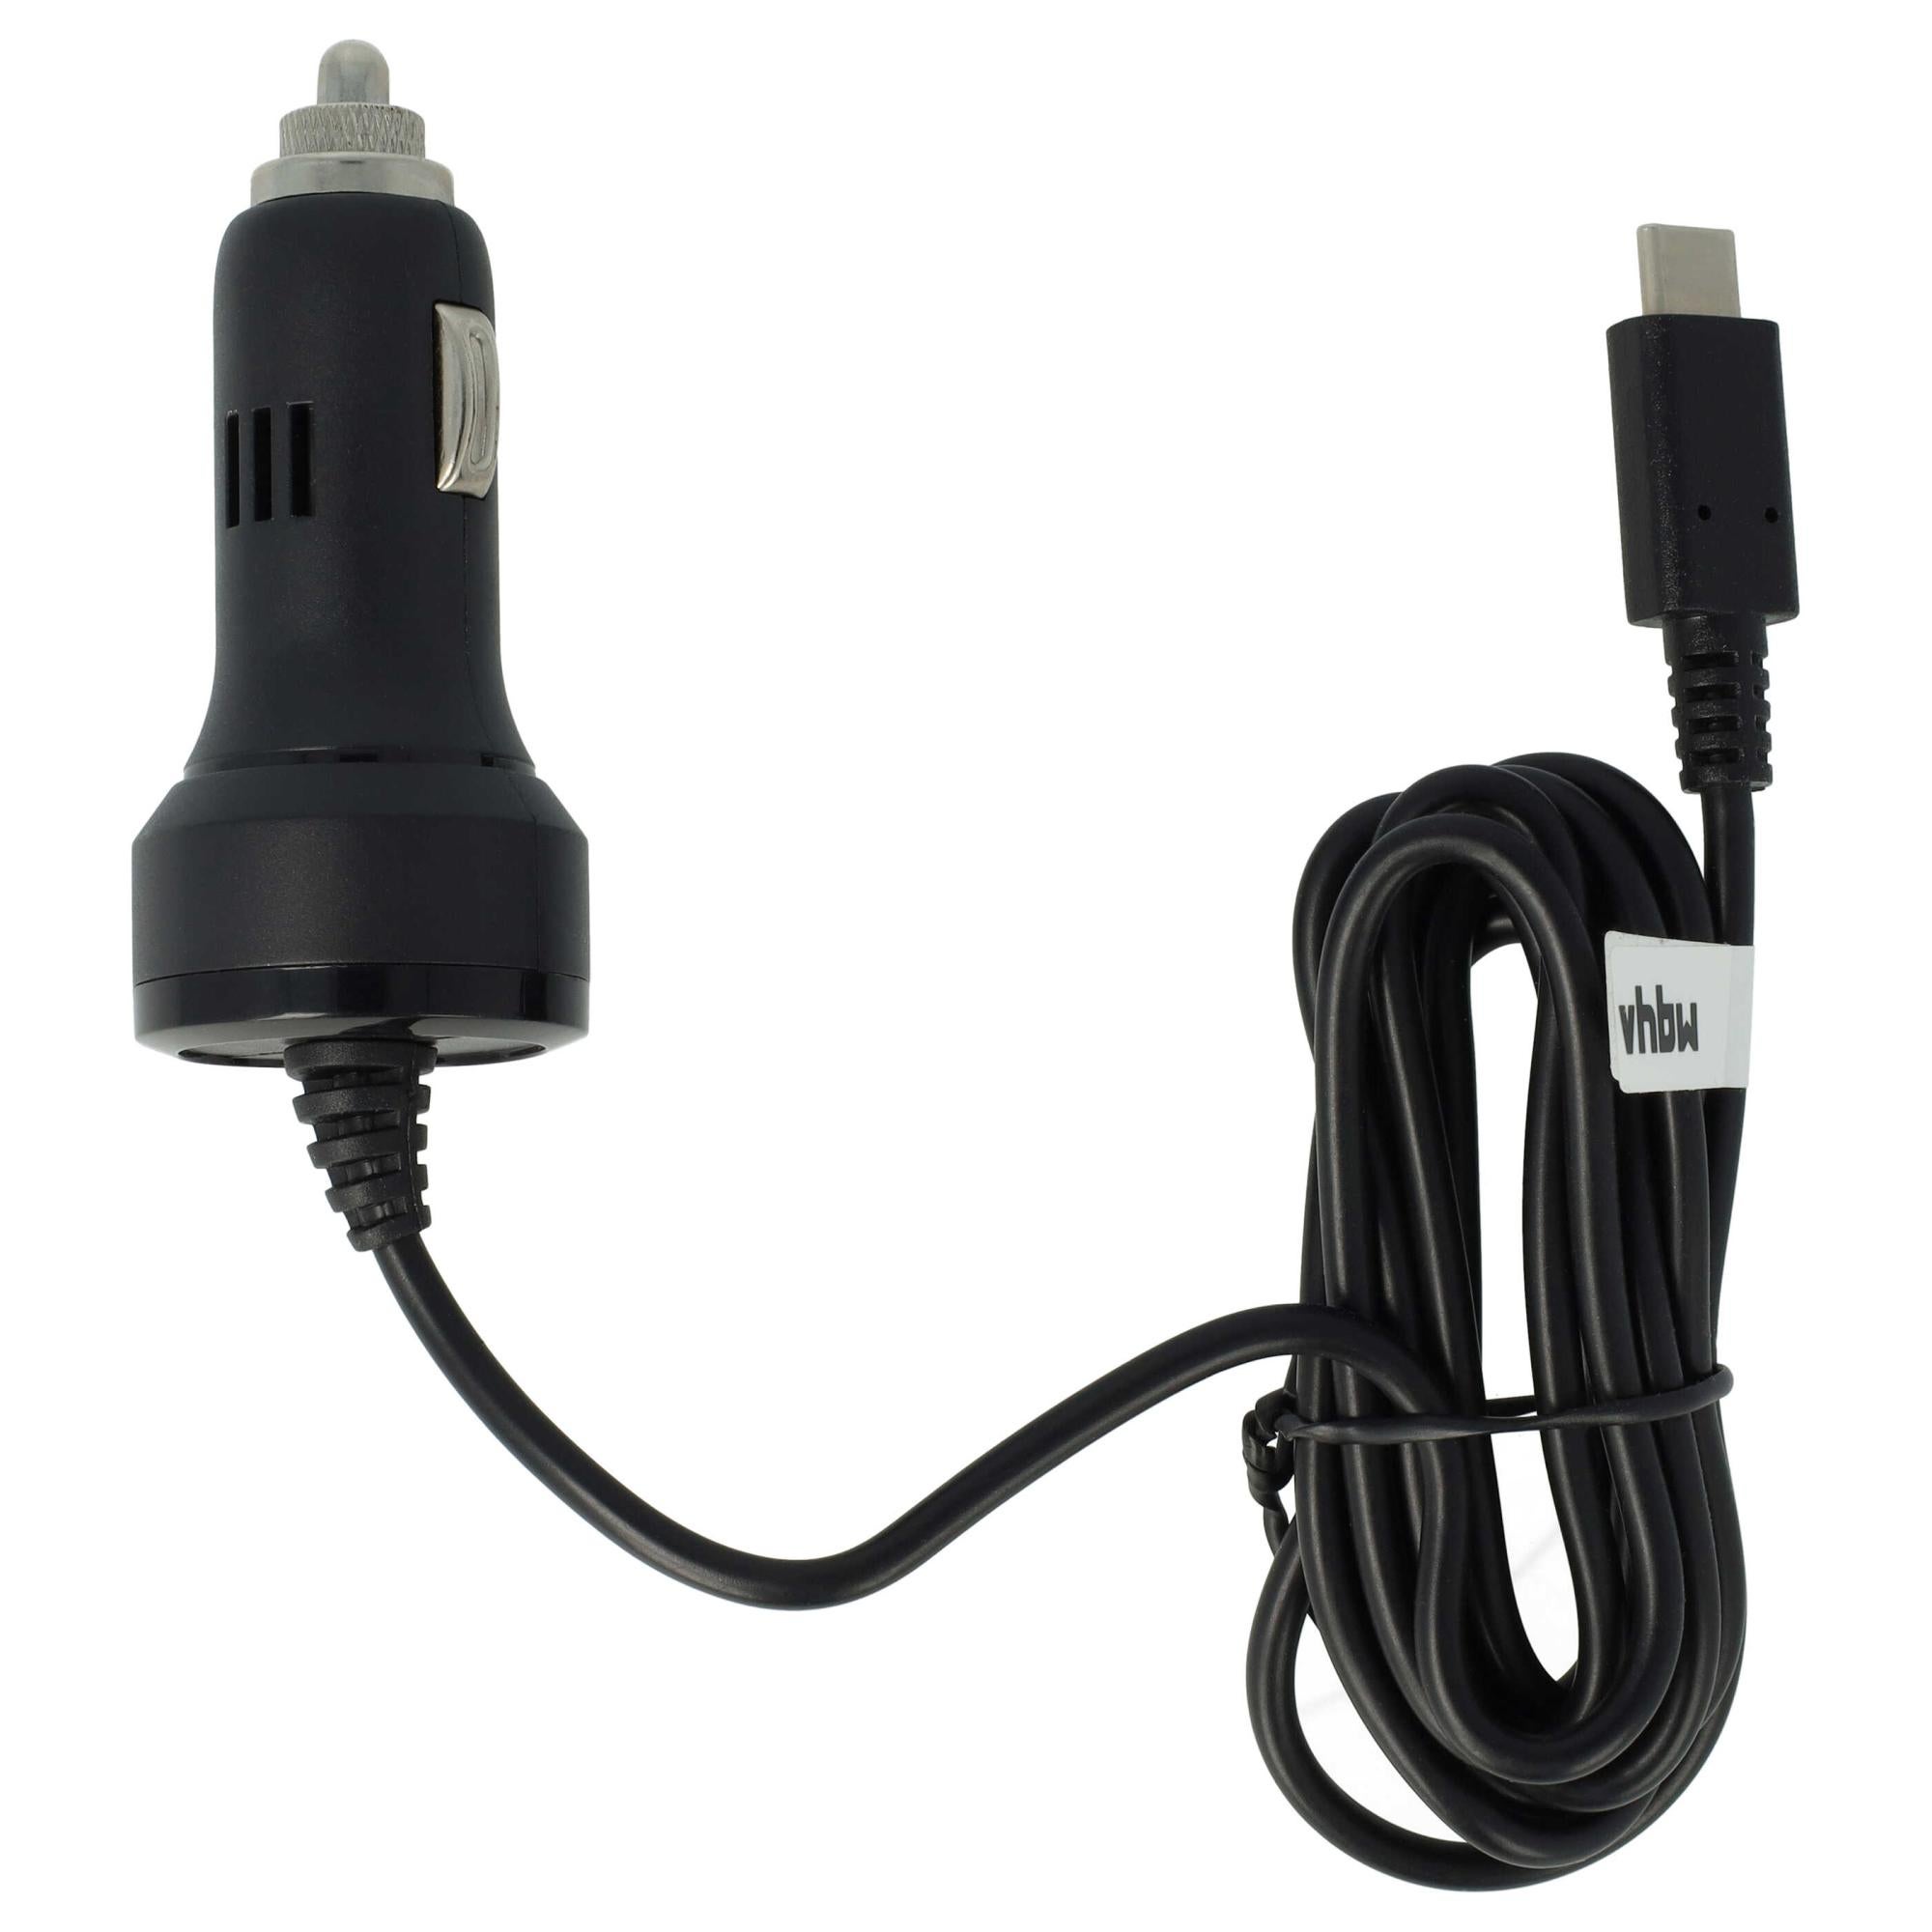 Watt&Co Chargeur USB 12V iOS/Android - Chargeur allume-cigare